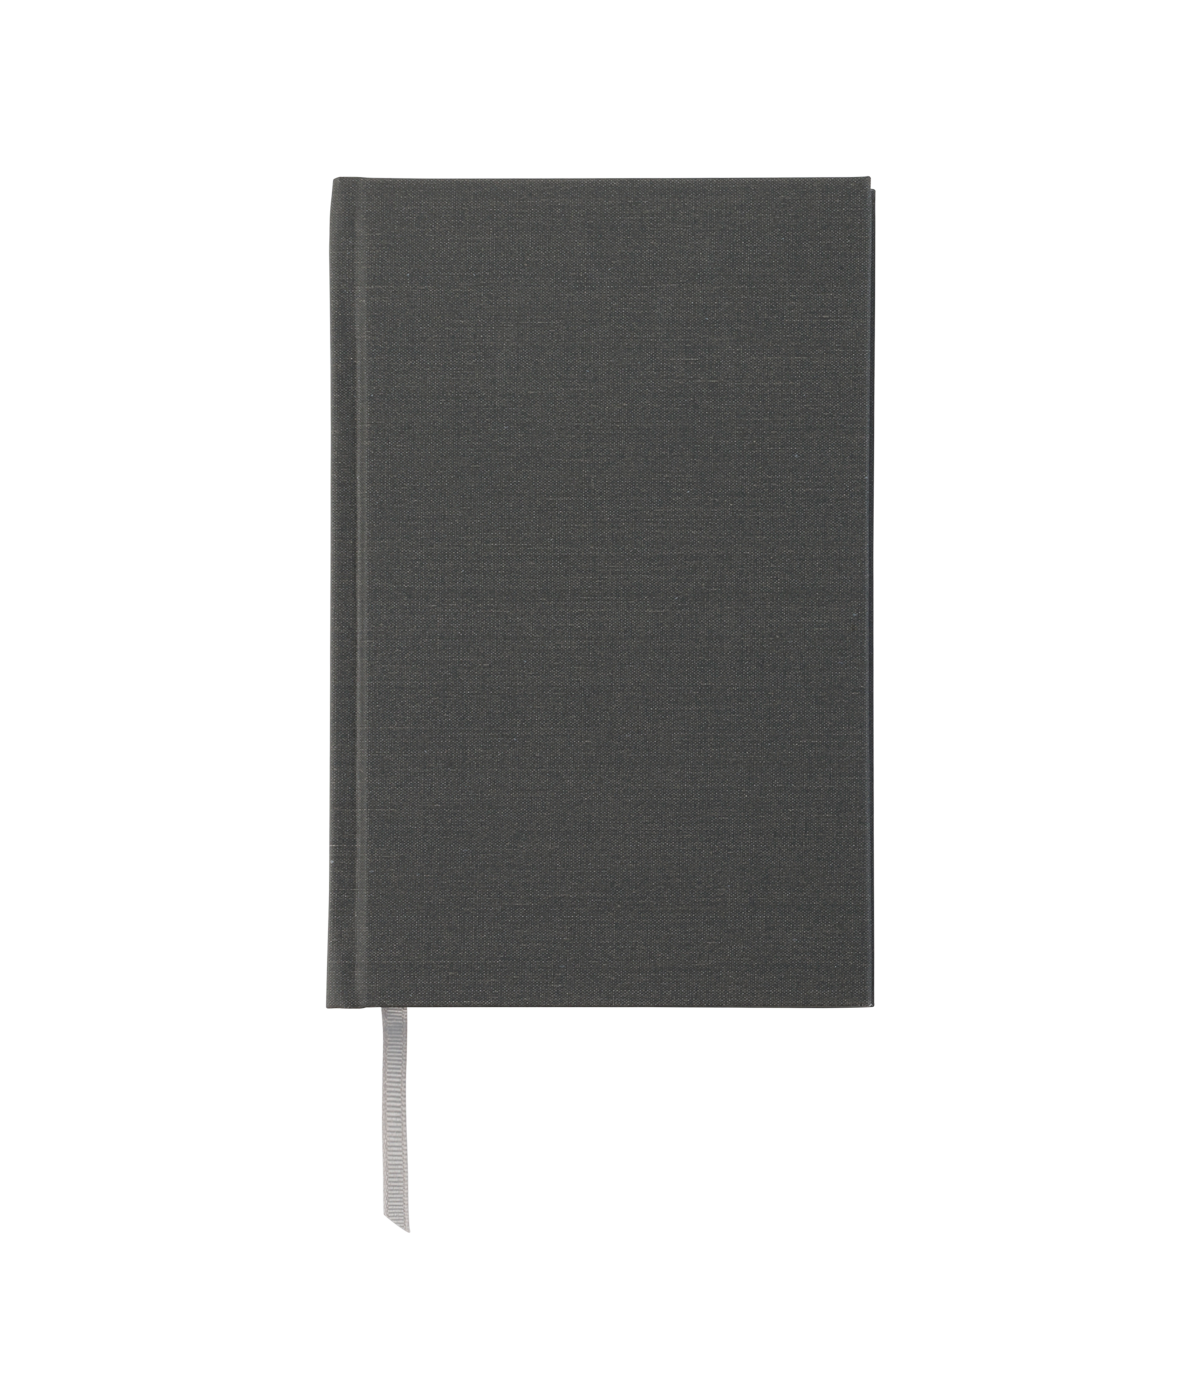 Day Book - Charcoal Gray